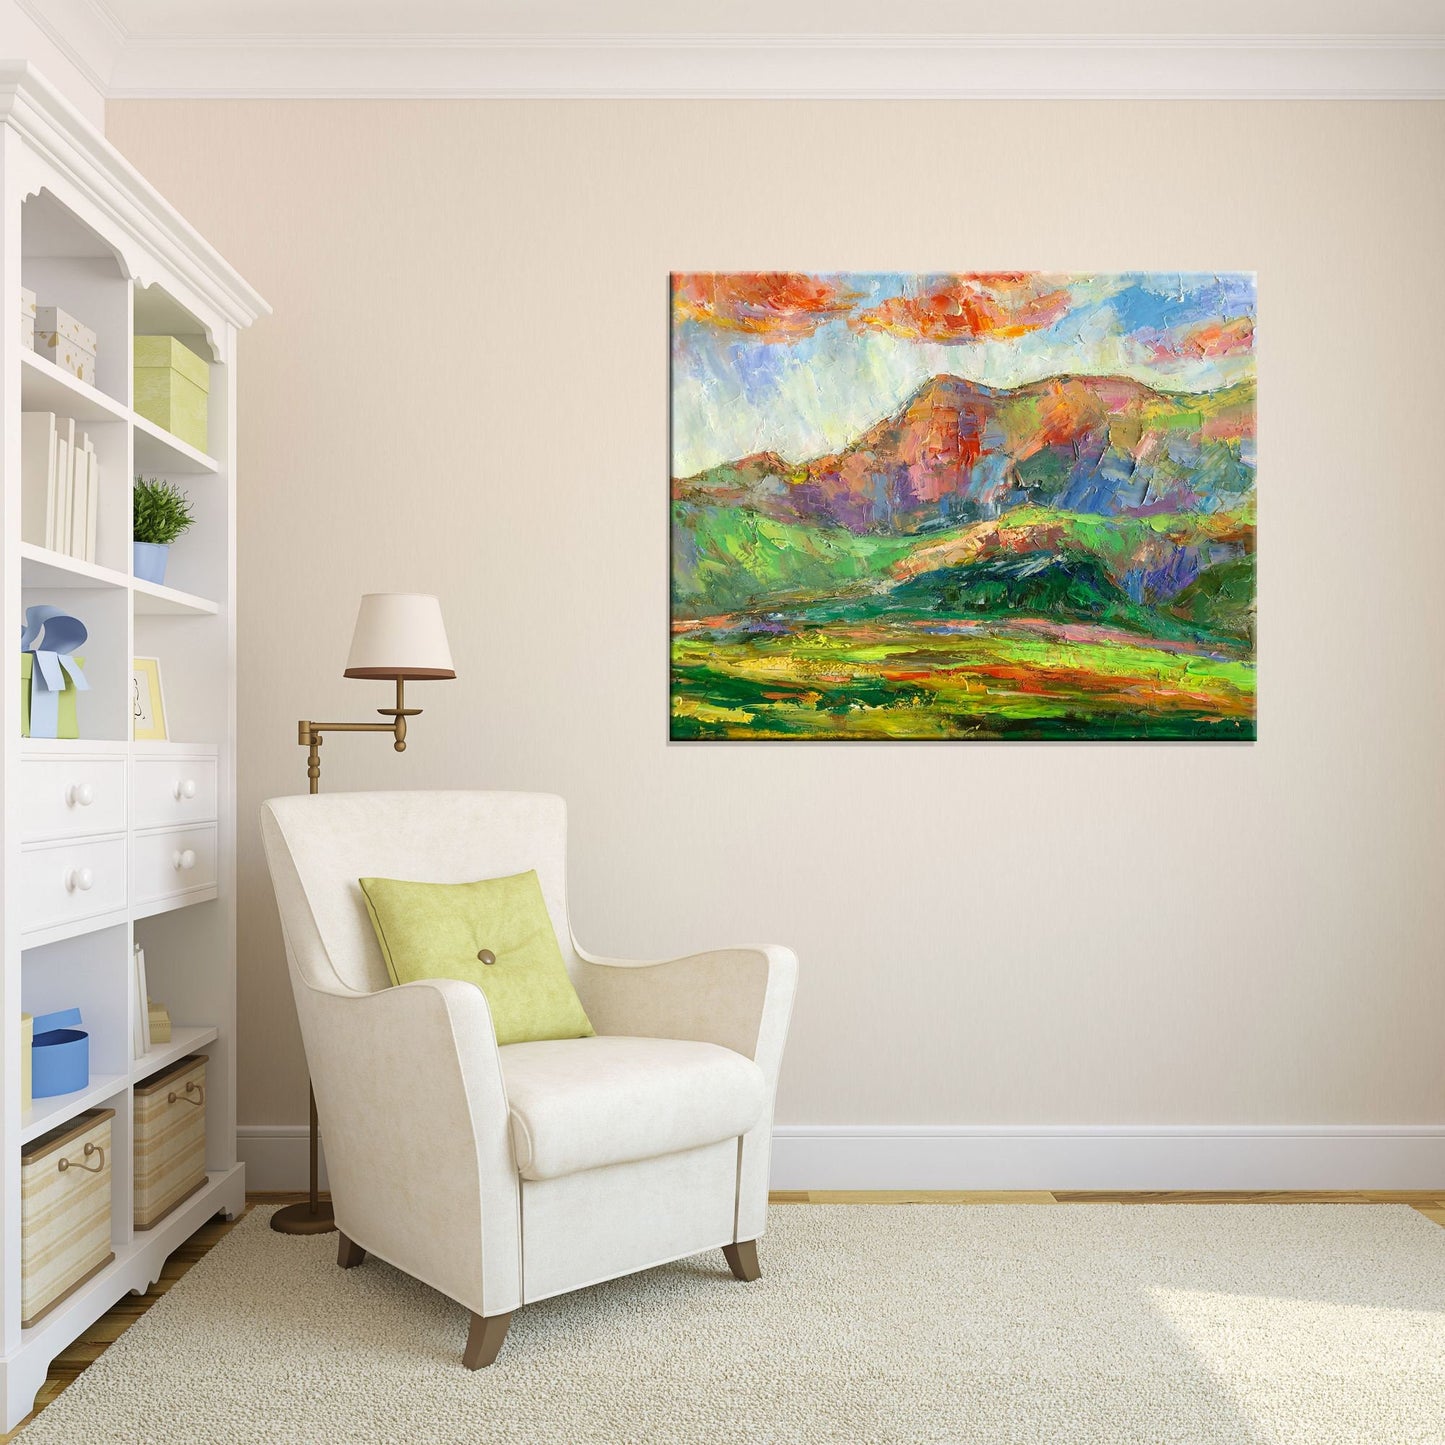 Add a touch of modern elegance to your home or office with this Large Wall Art Impasto Oil Painting - Original Artwork at its finest